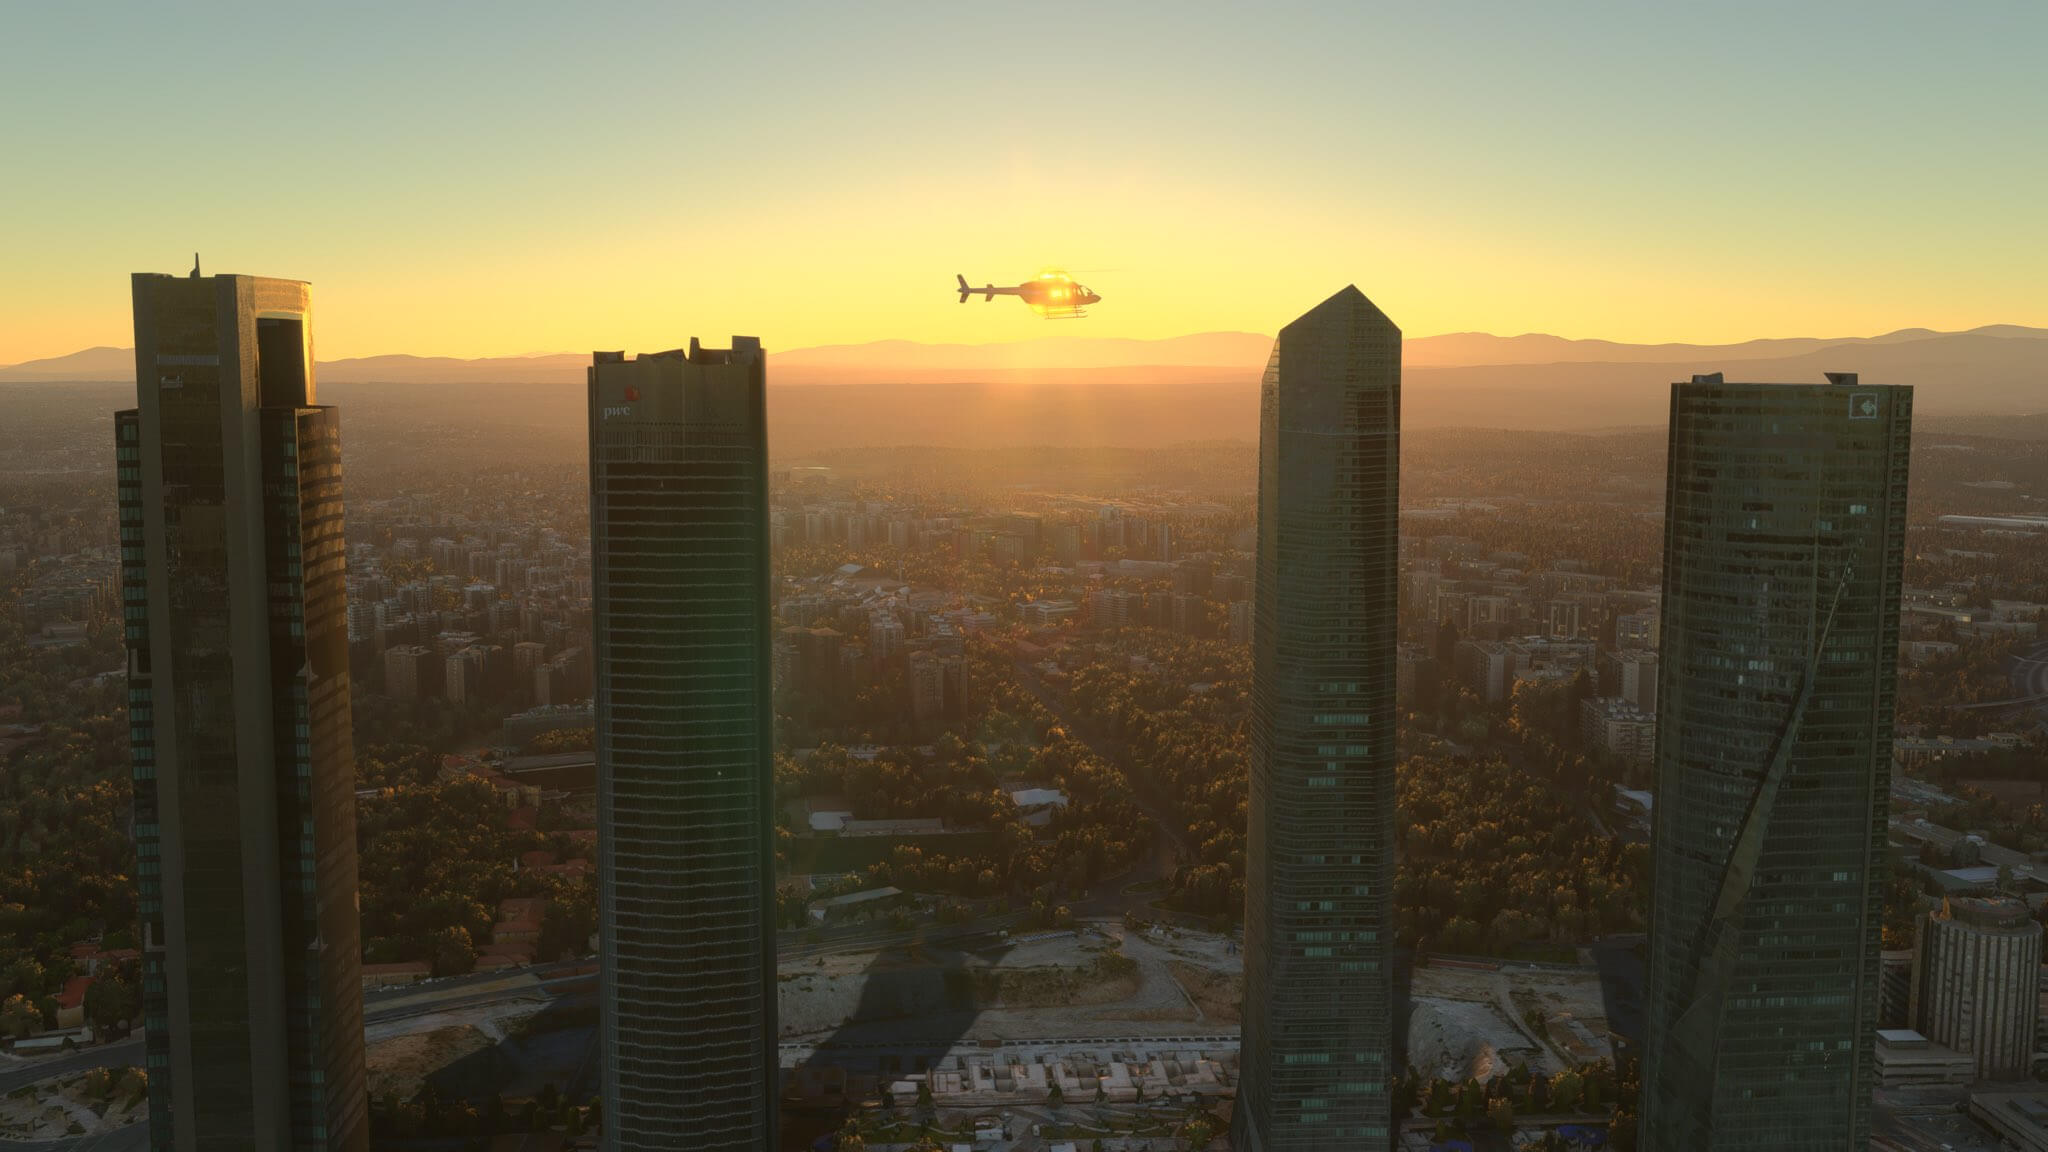 A Bell 407 Helicopter flies near a cityscape with the sun shining through the aircraft windows